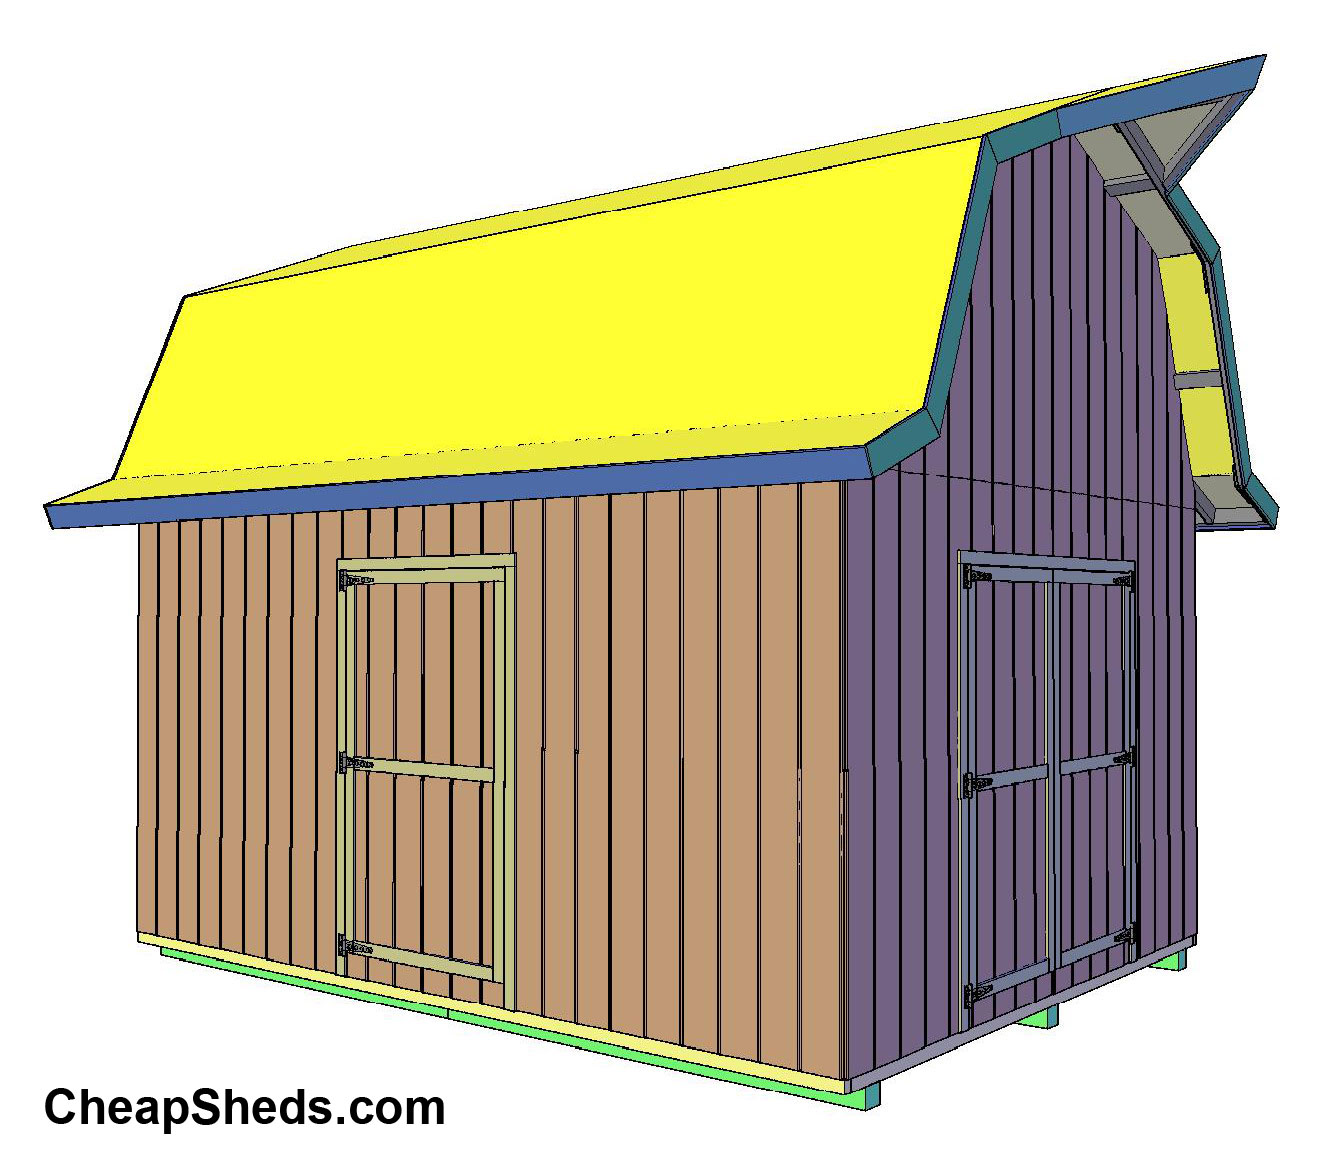 Build shed cost estimator [] Shed tips